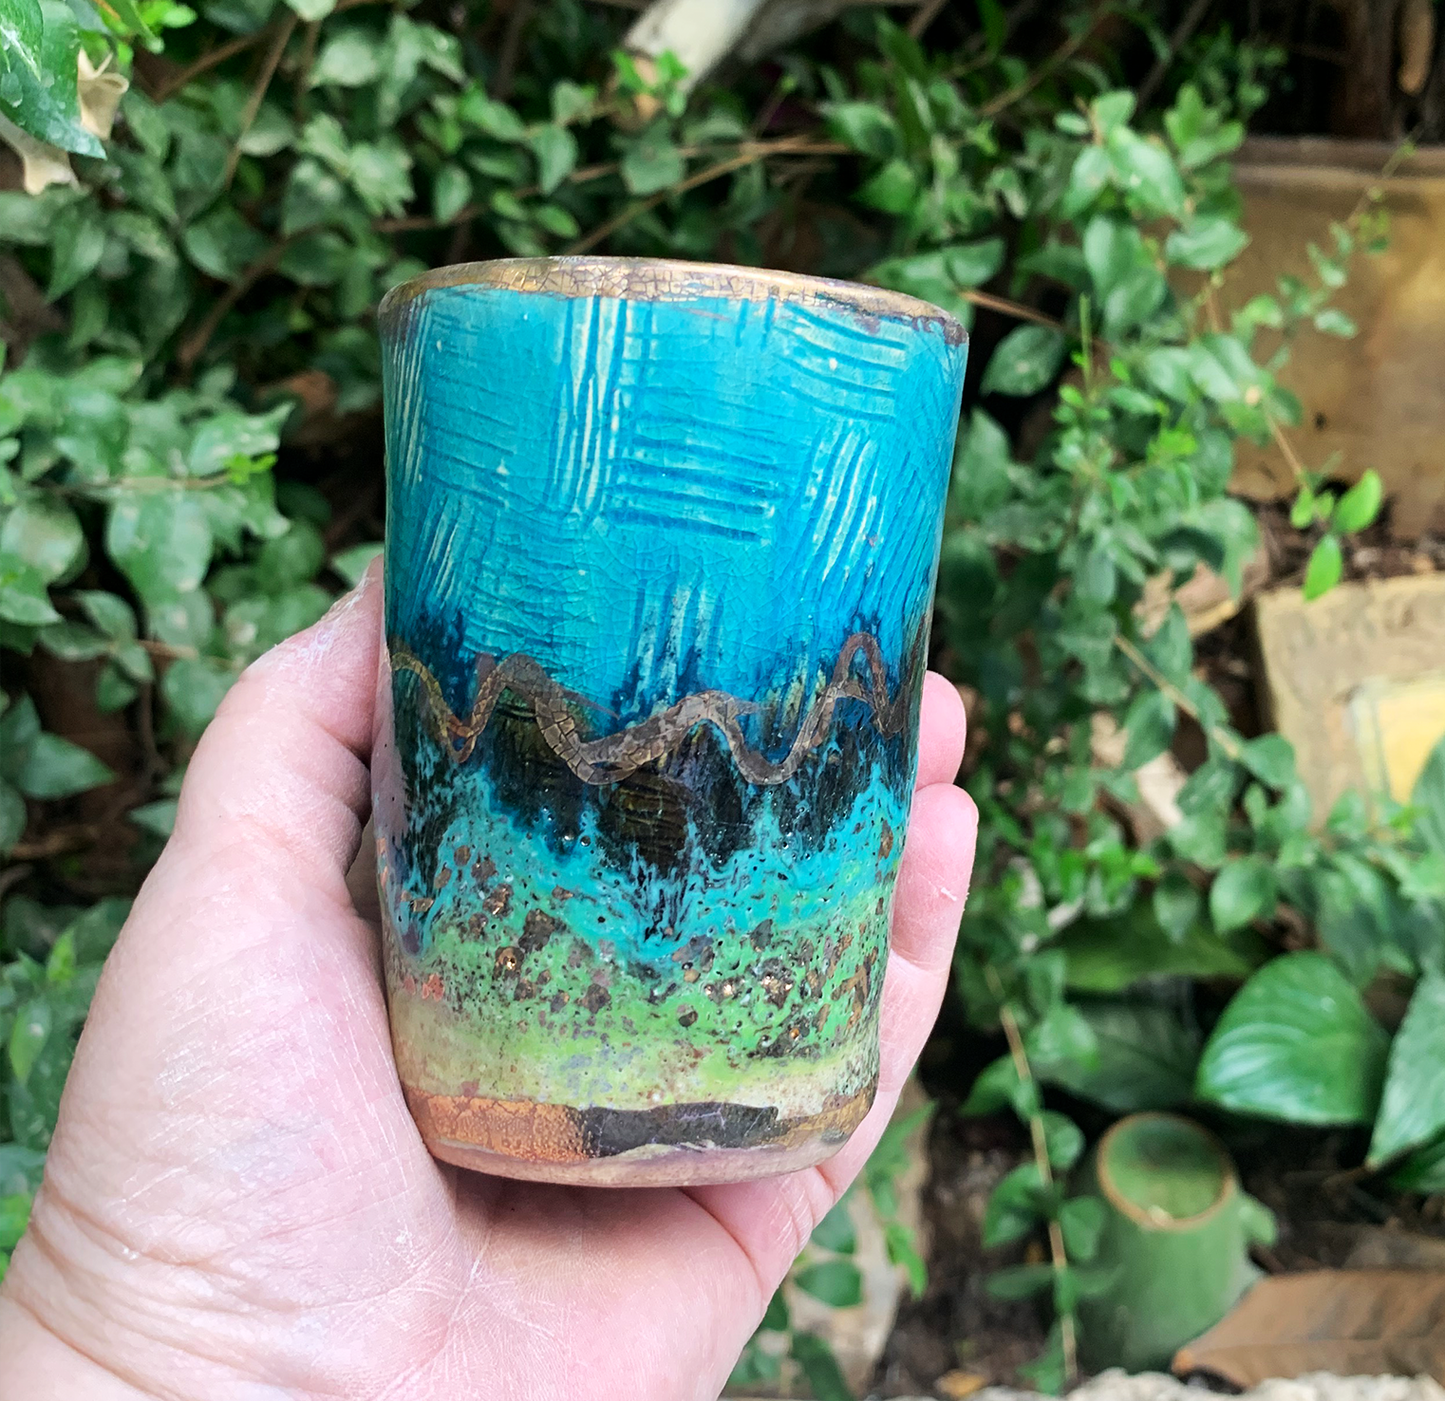 Kiddush Cup - Abstract Landscape in Greens and Blues